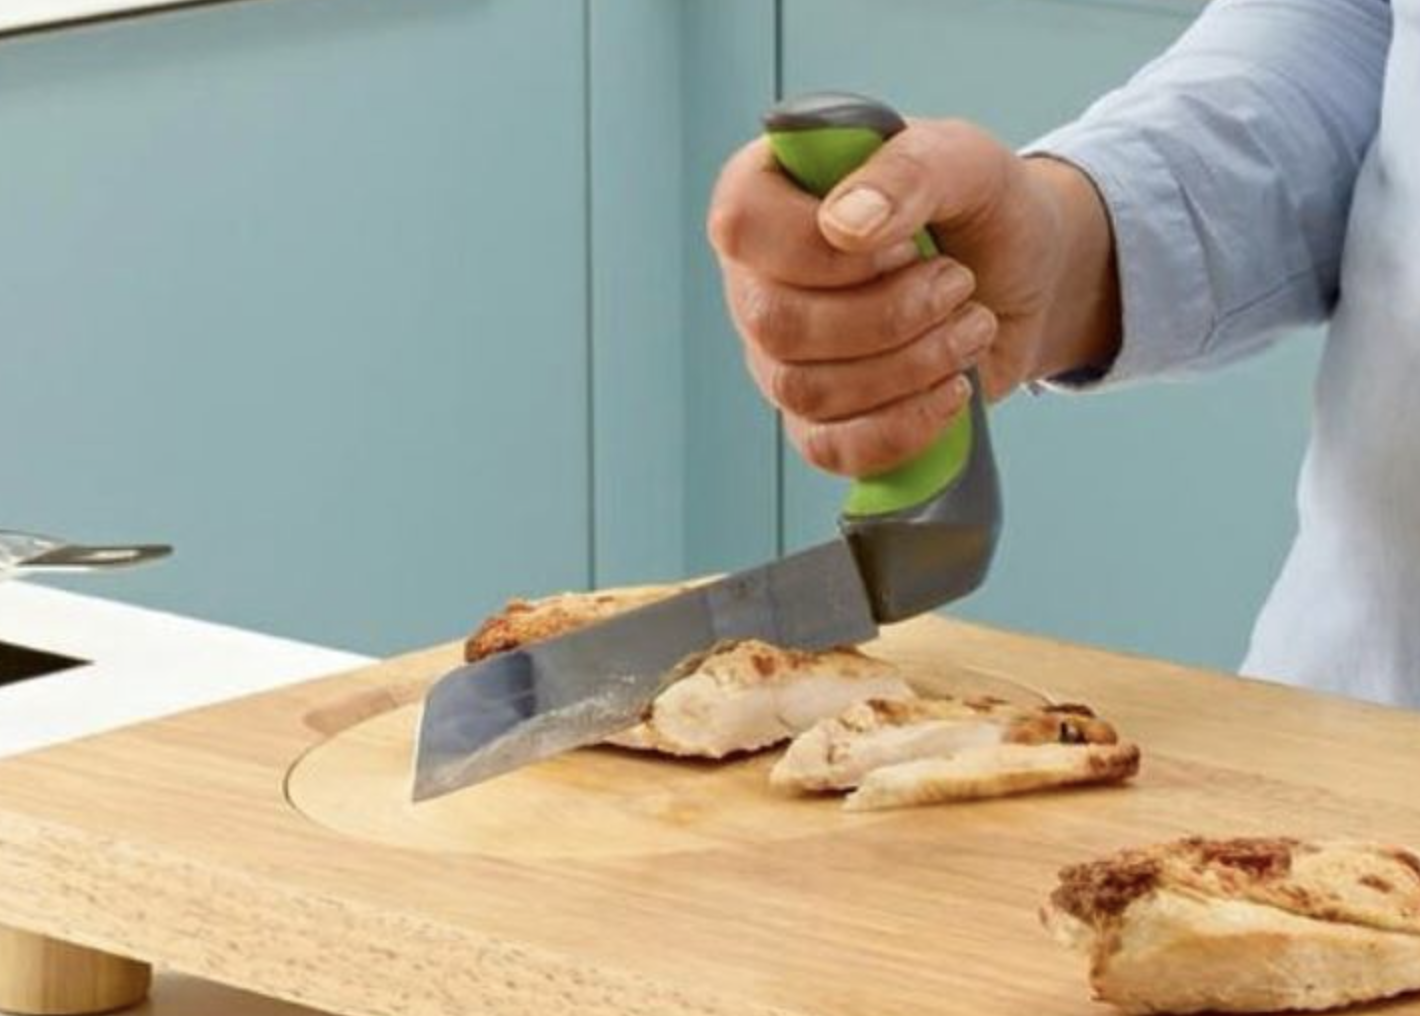 The 7 Best Kitchen Tools for People With Arthritis